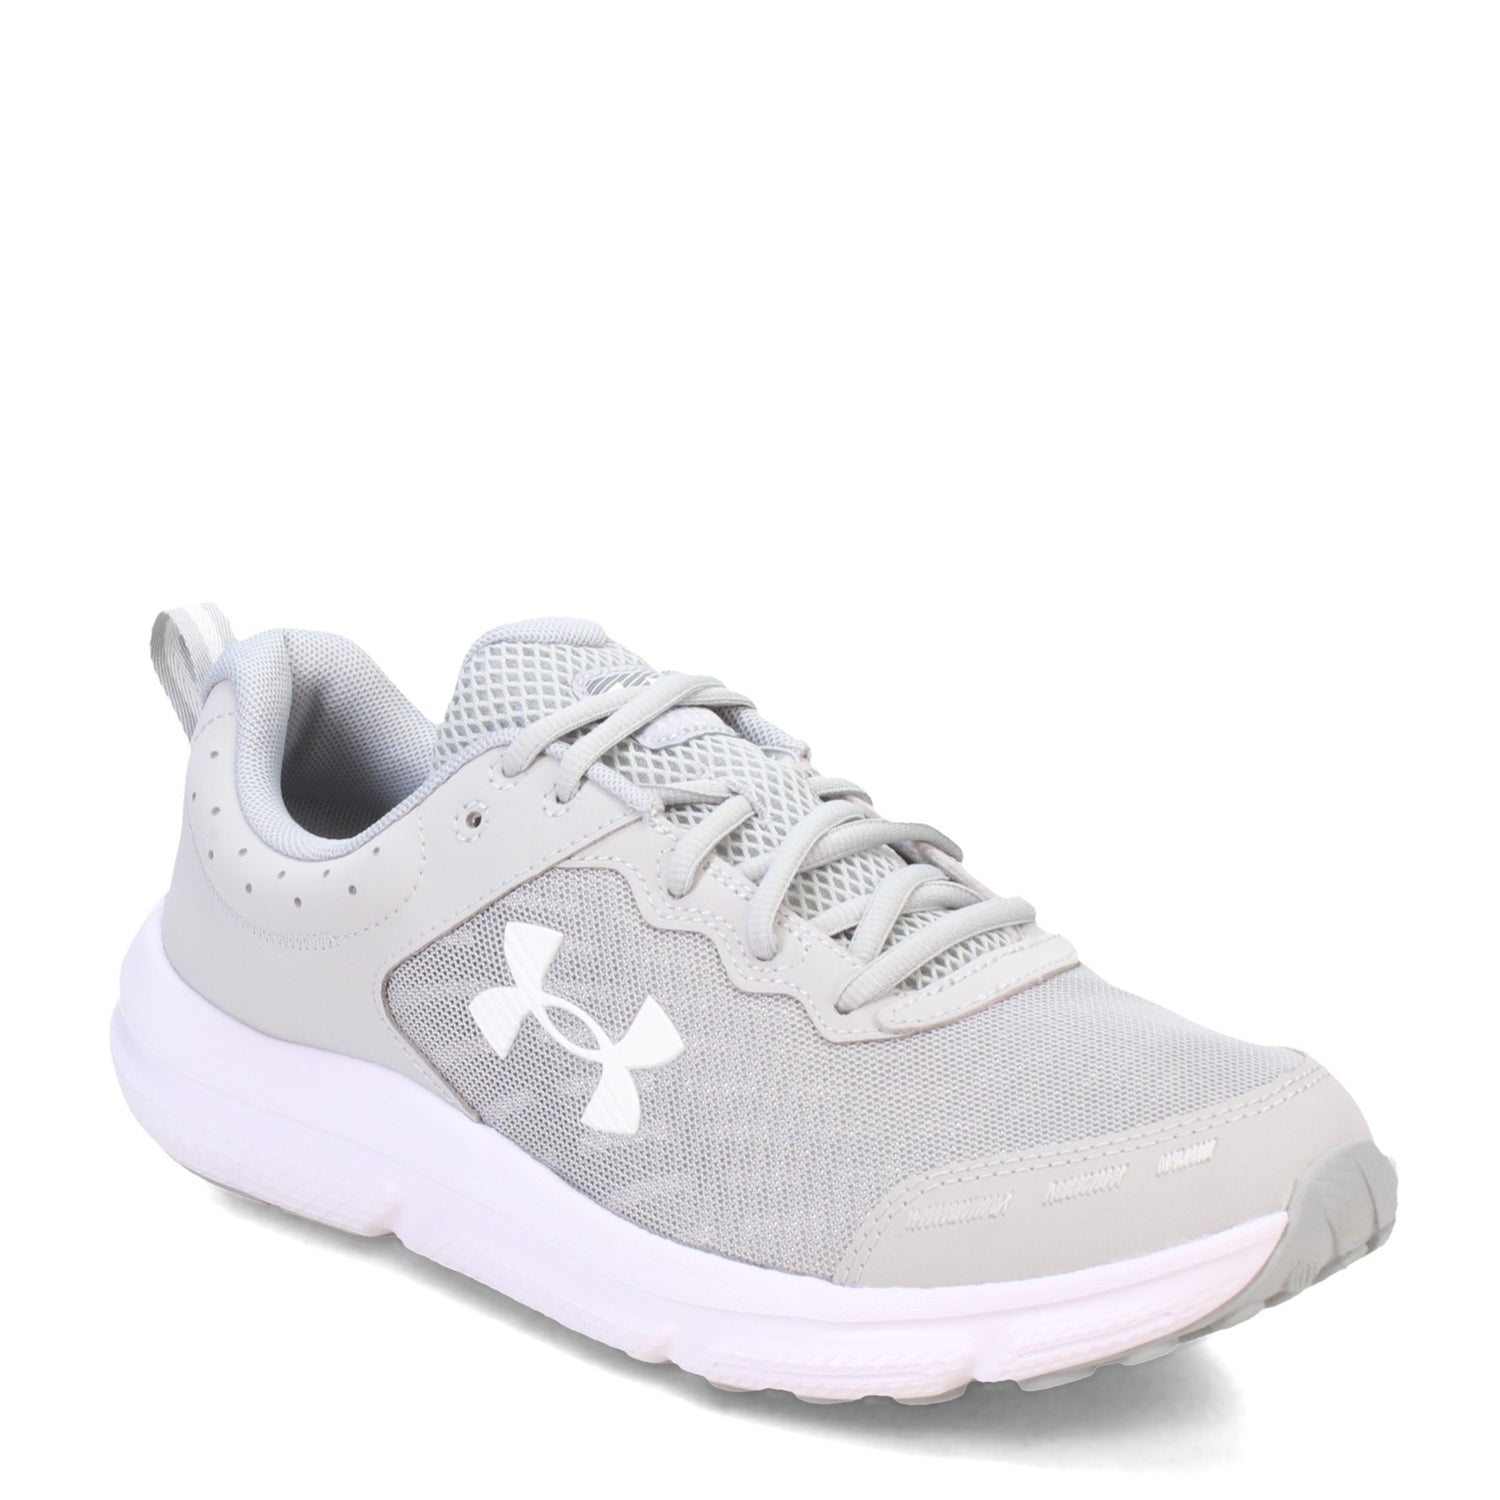 Under Armour Charged Assert 10 3026175-102 Training Running Athletic Shoes  Mens